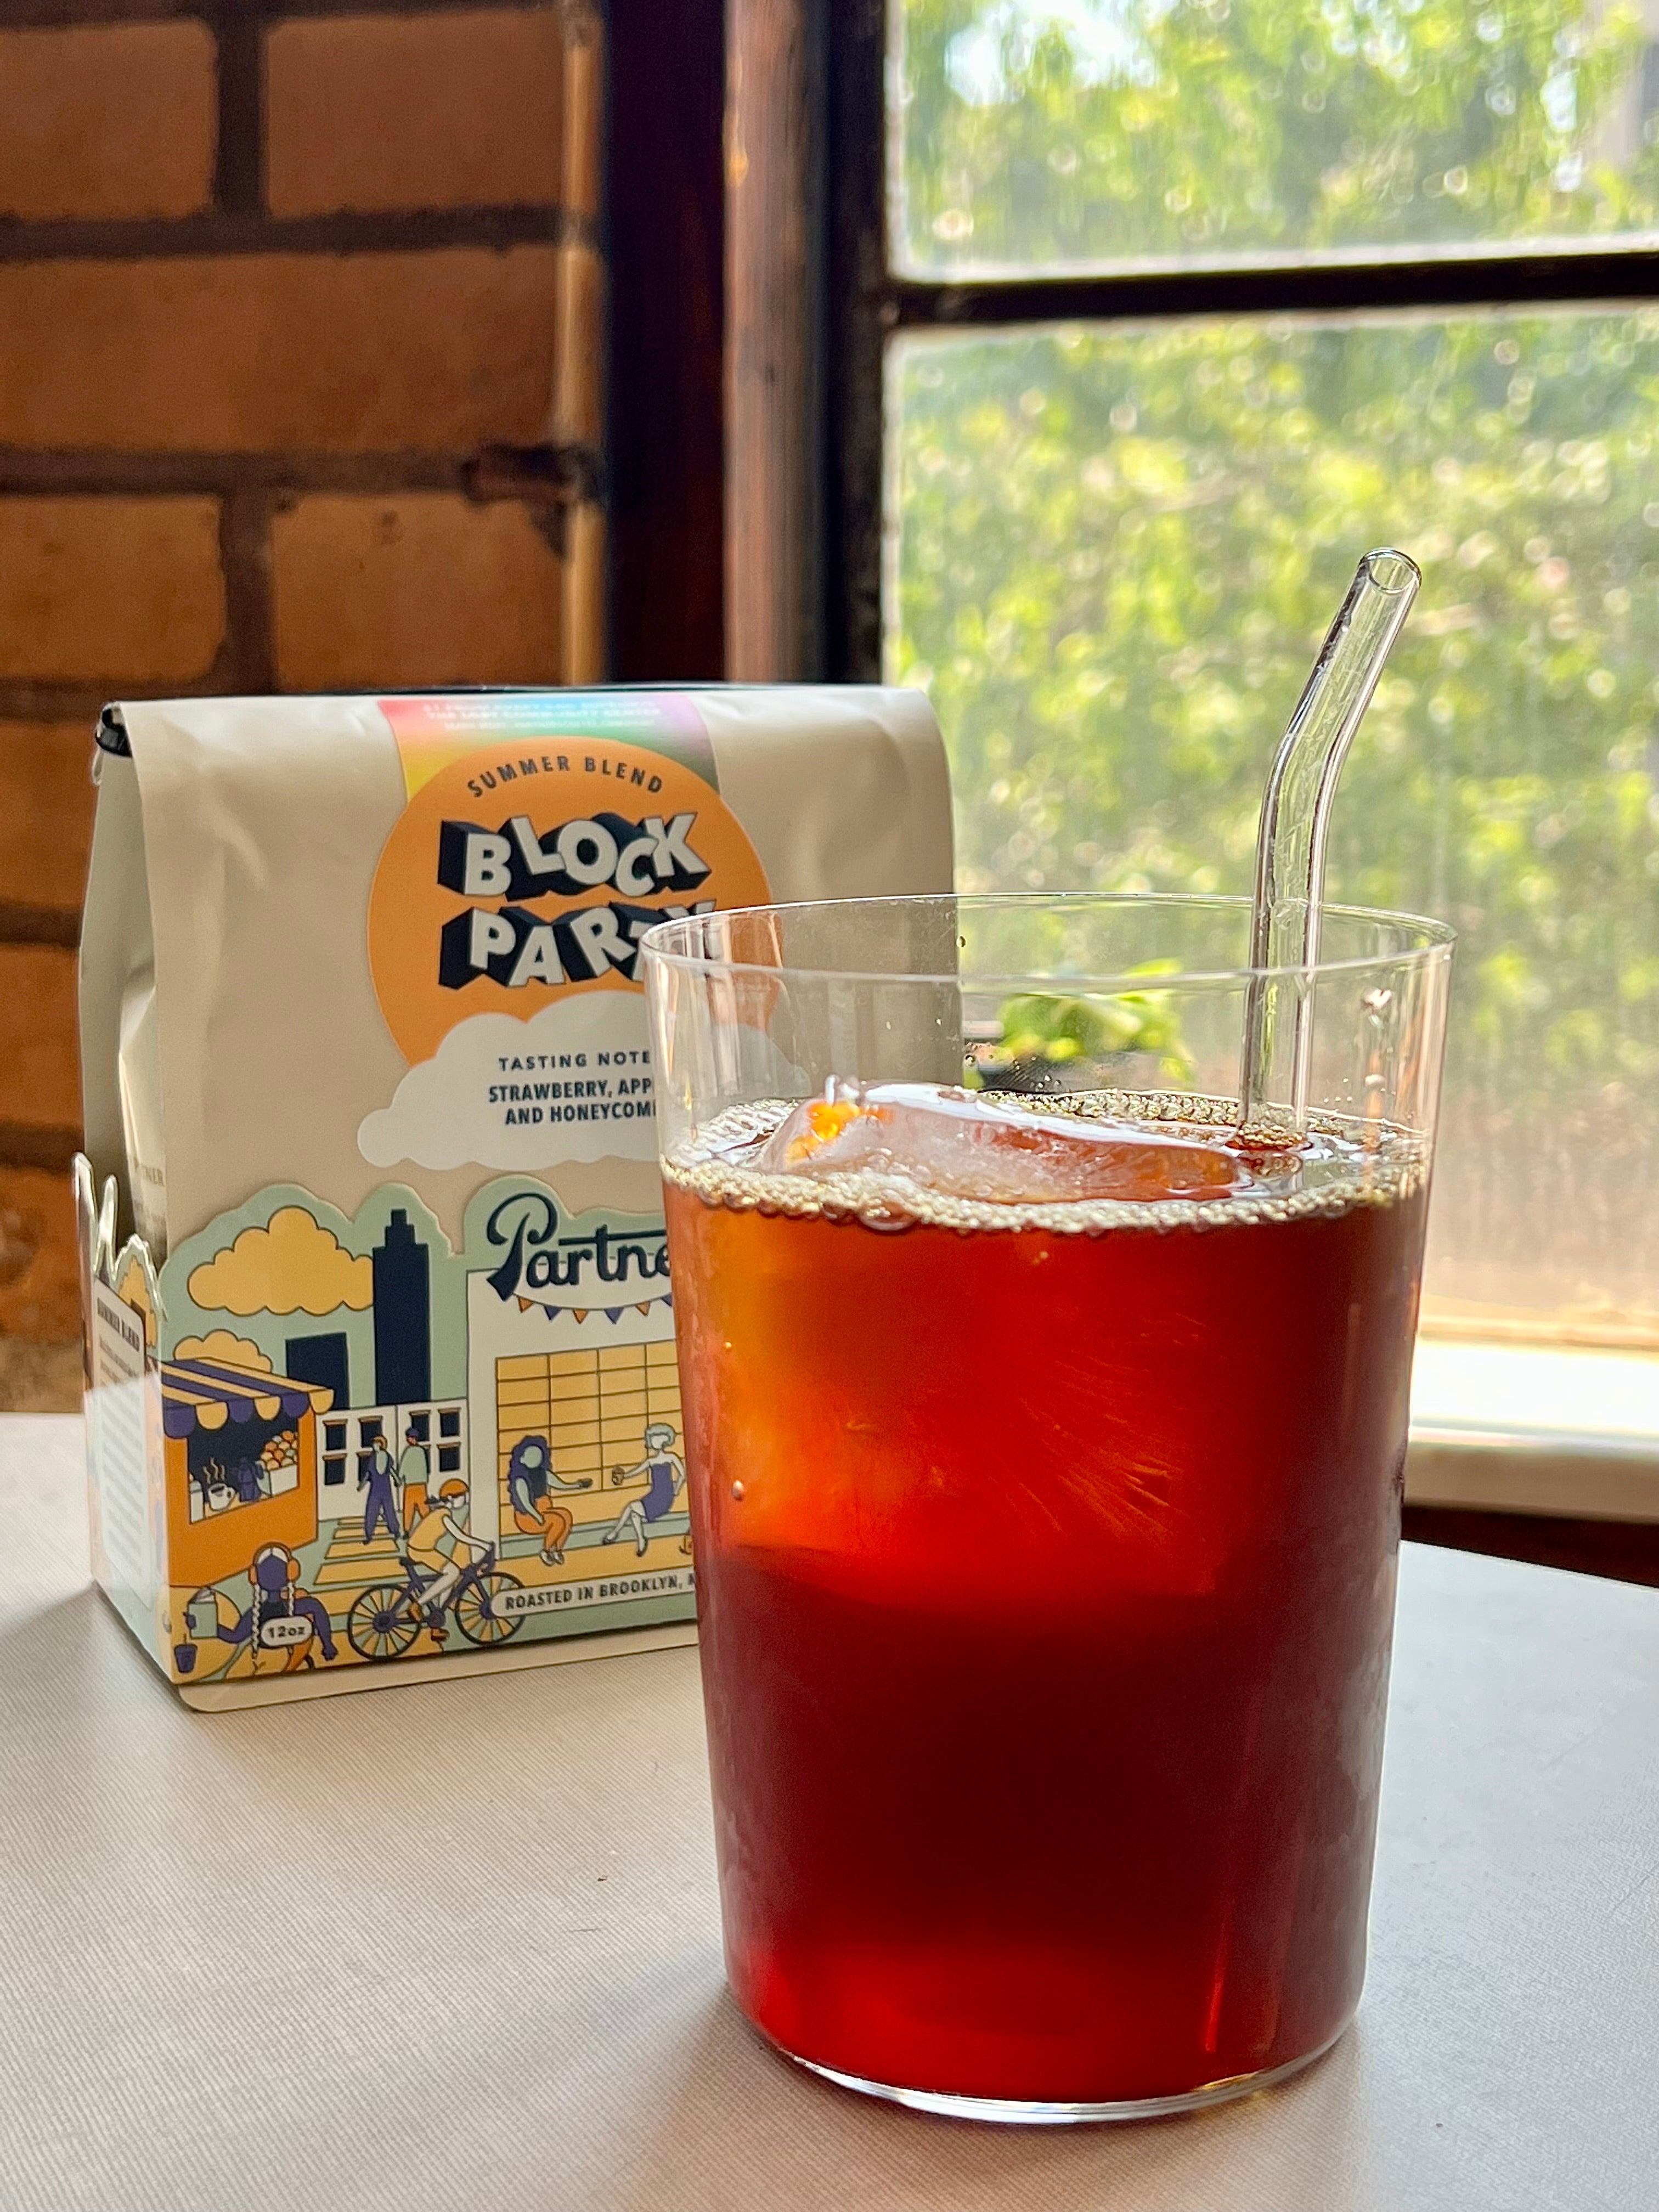 Image showing a cup of amber colored iced coffee in a glass with a straw, sitting in front of a white package of coffee with a blue and orange label reading "block party" with an illustration of new york city